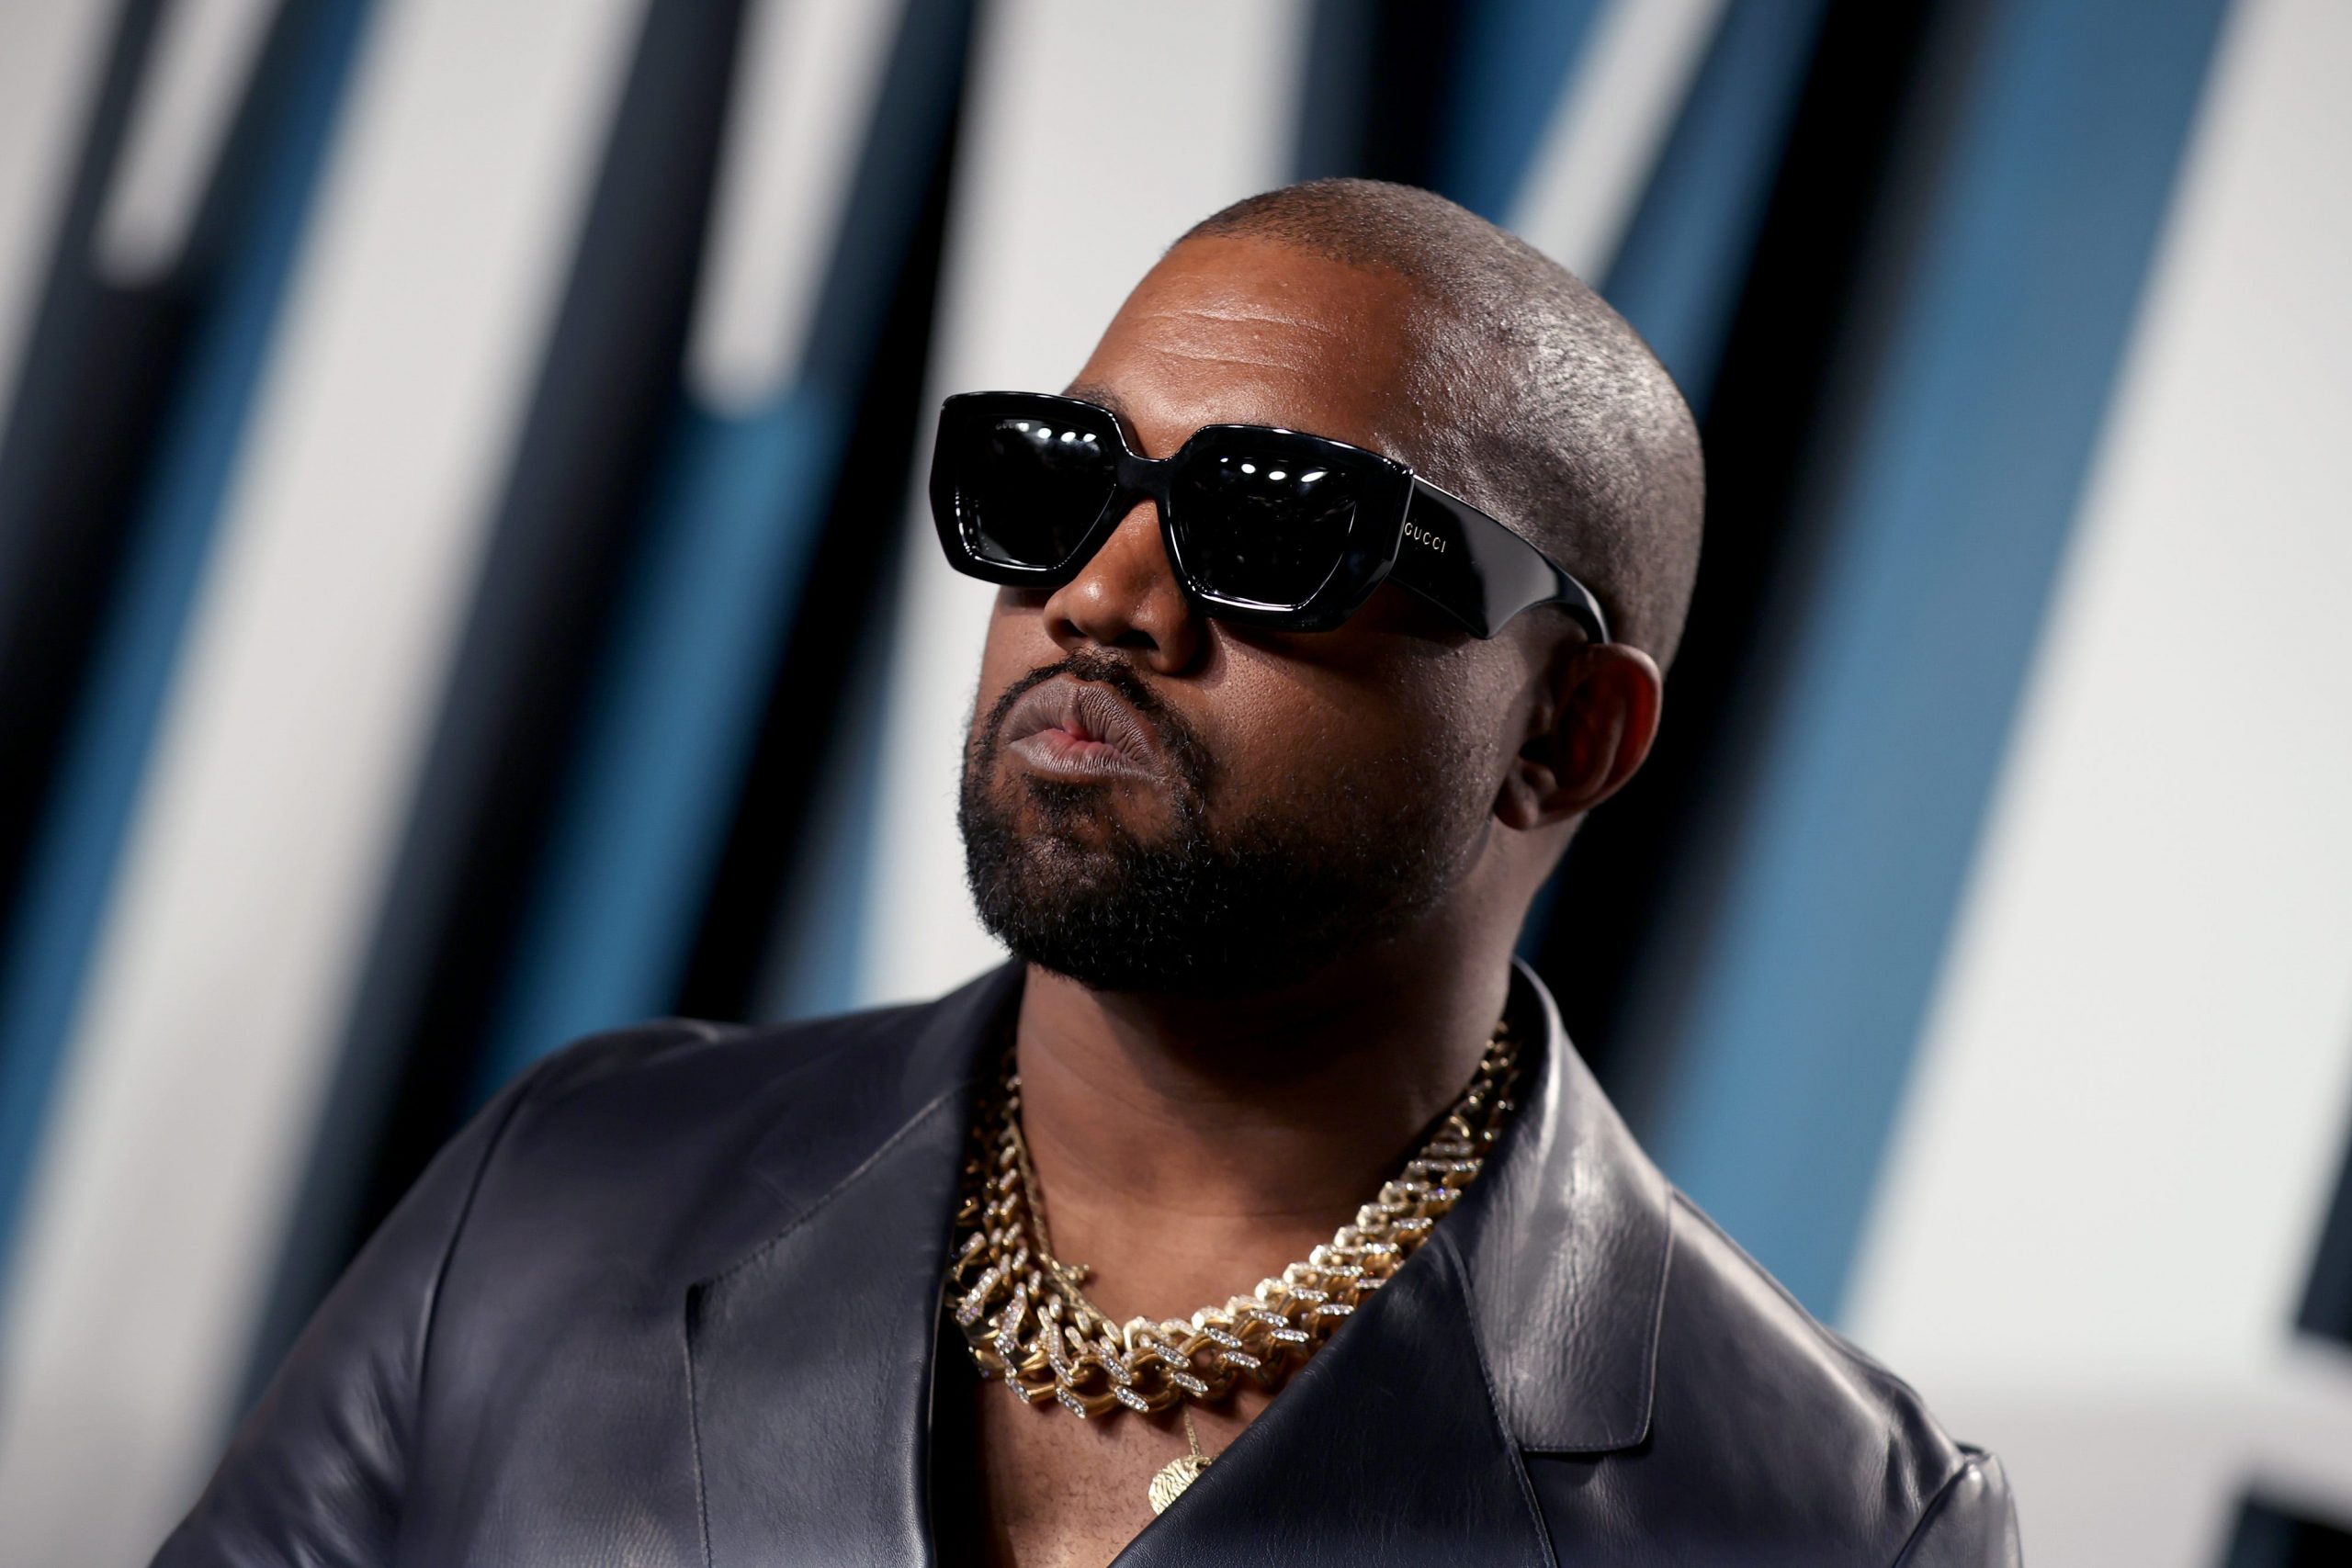 Kanye West wears sunglasses and a gold necklace at an event.